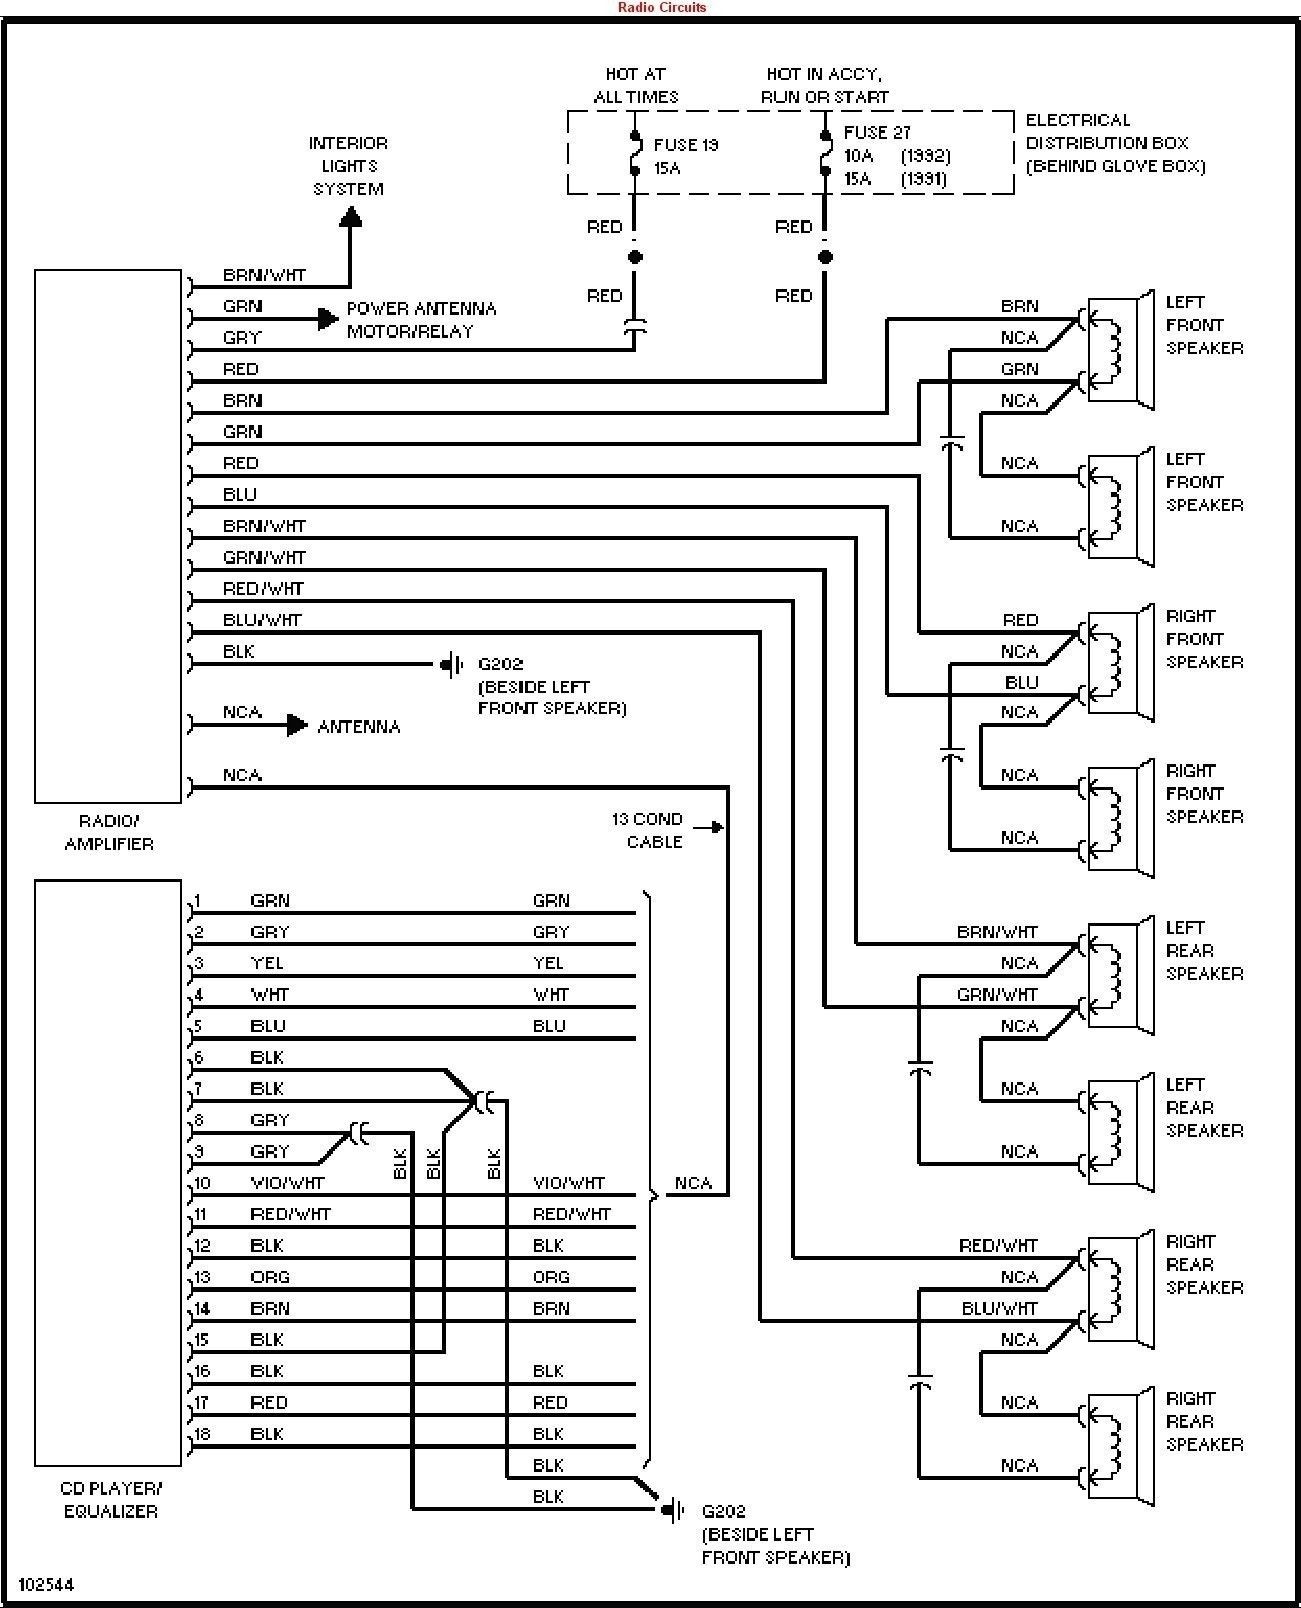 John Deere Electrical Bo Wiring Systems New 2003 Dodge Ram 1500 Radio Wiring Diagram Diagram Of John Deere Electrical Bo Wiring Systems